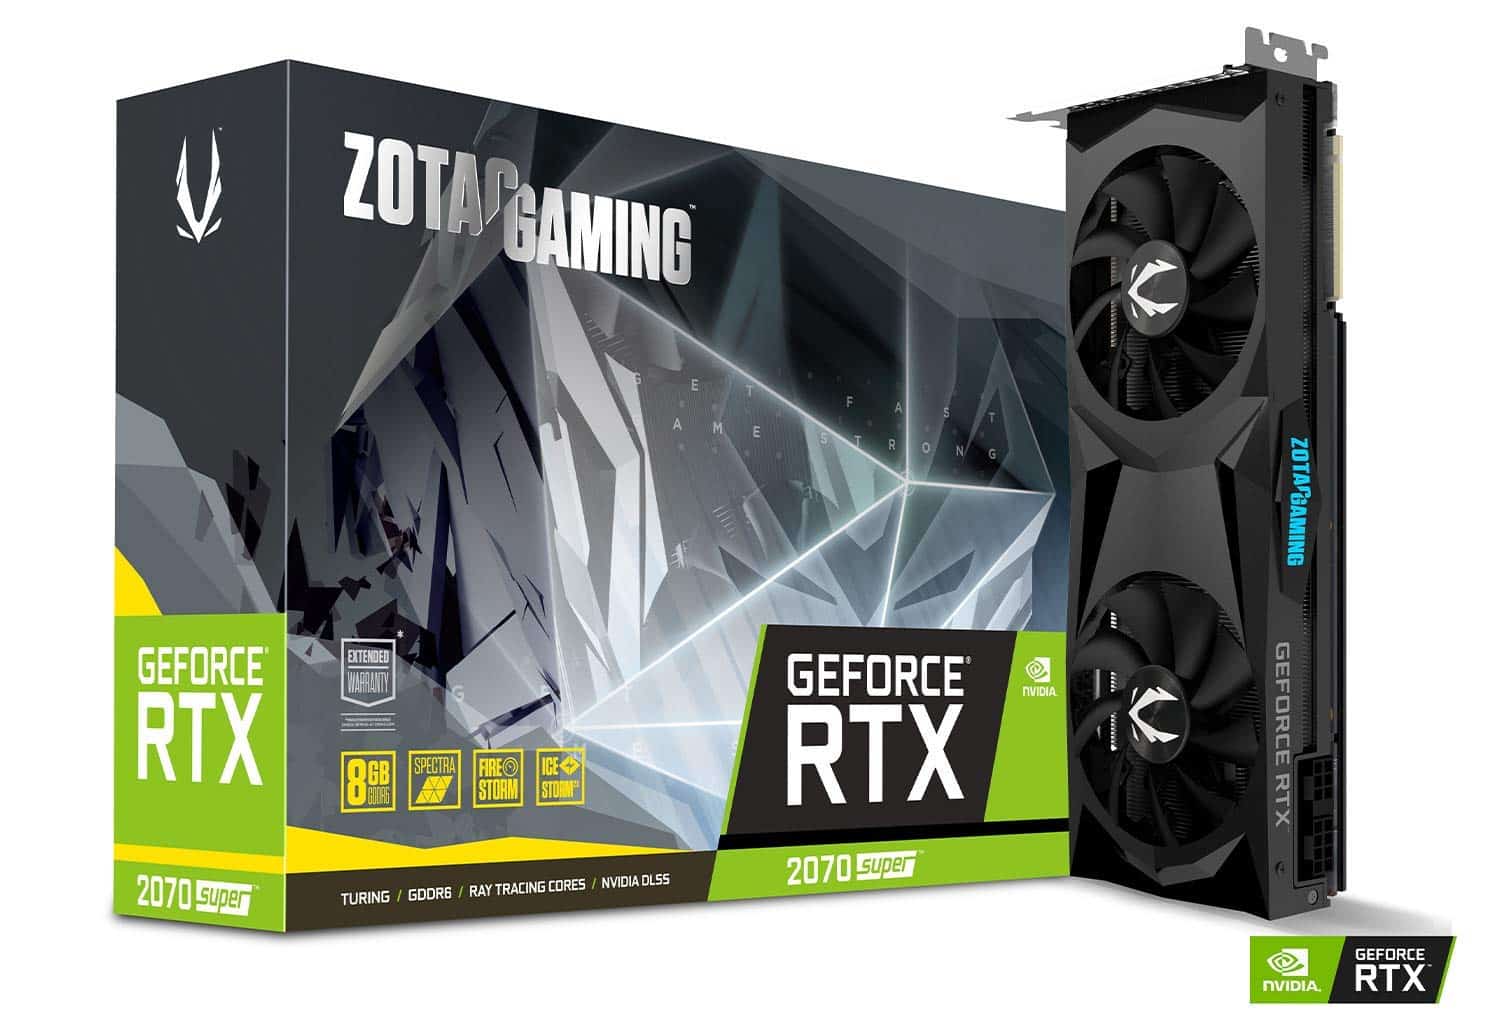 BEST RTX 2070 GRAPHICS CARD